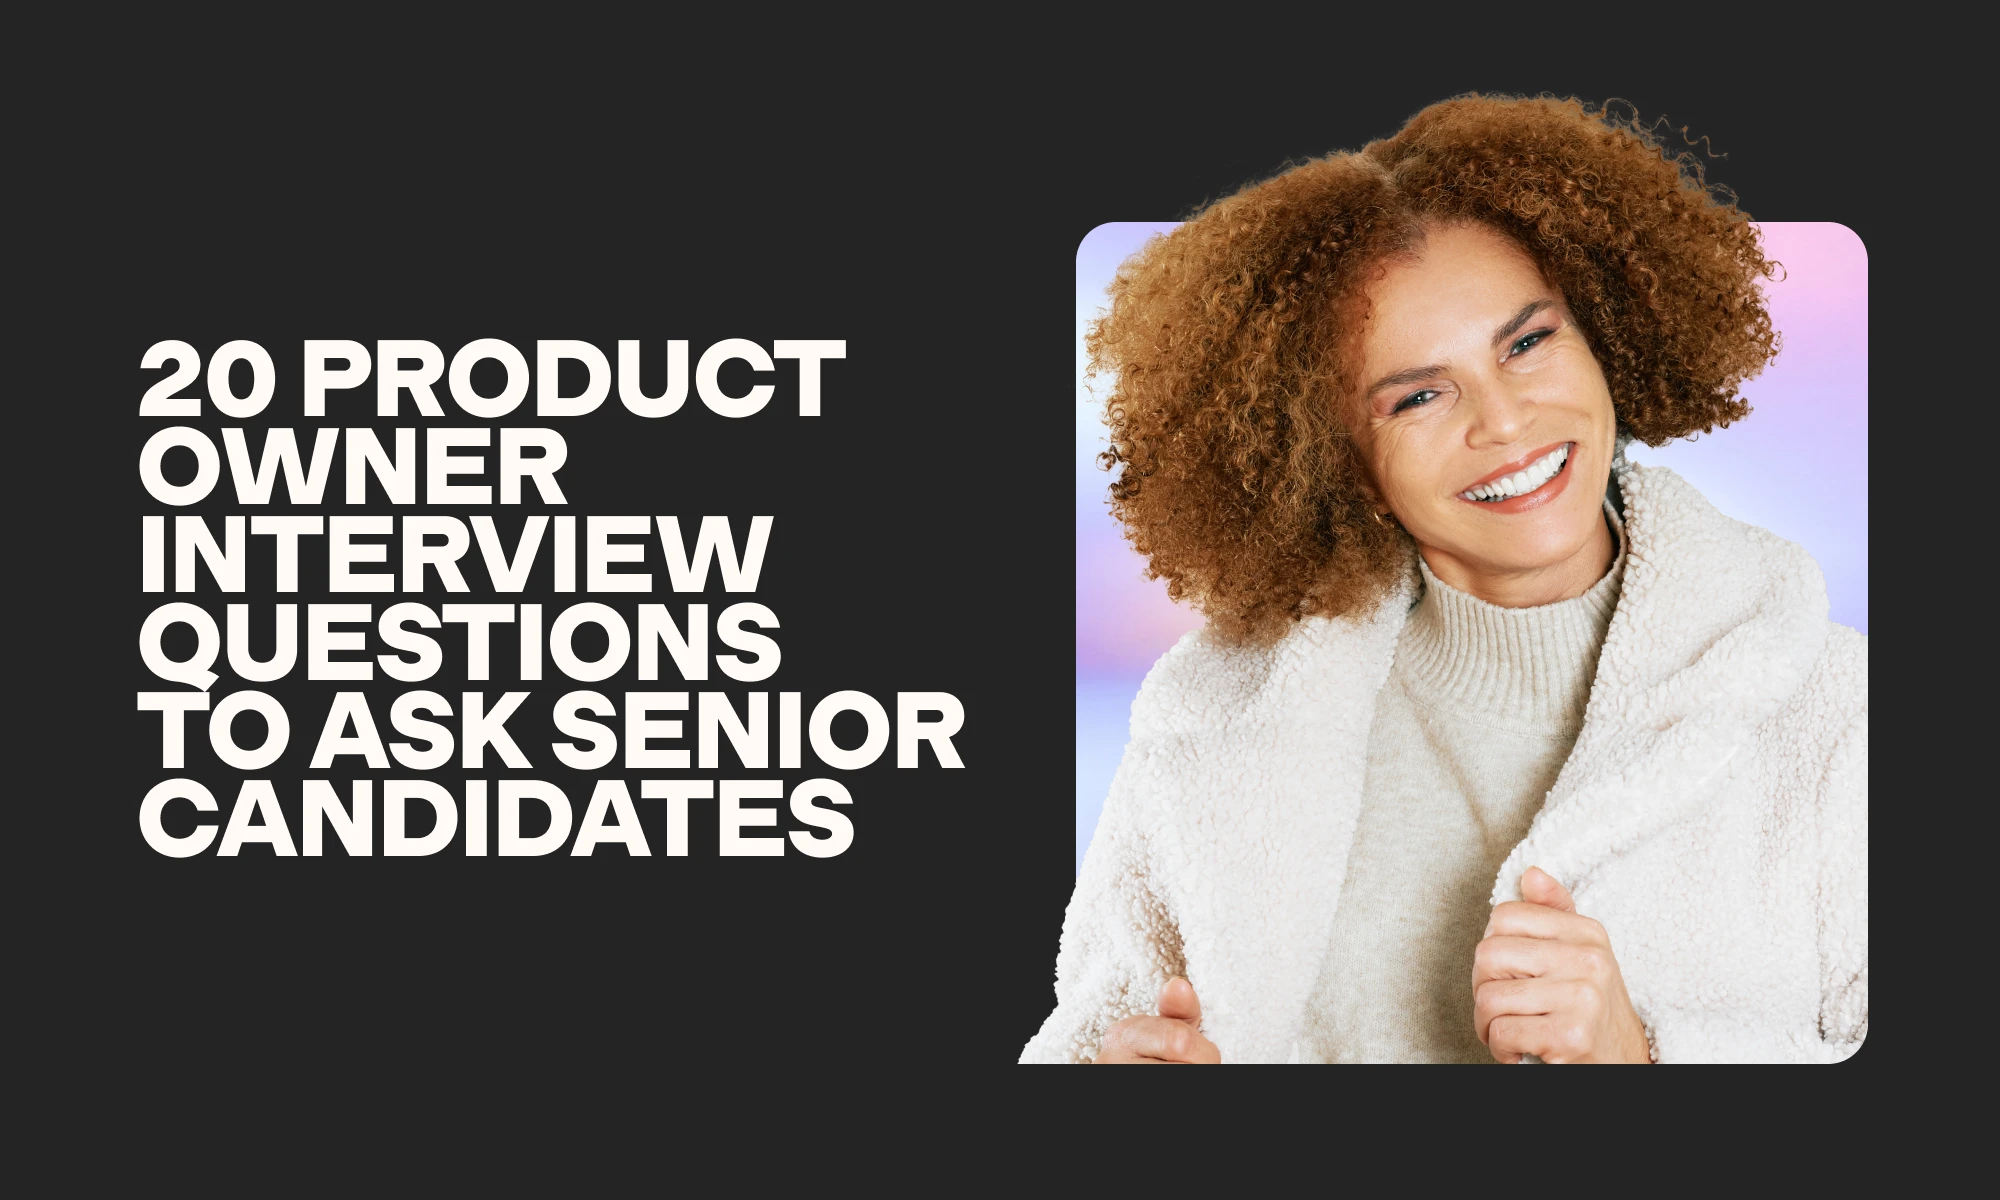 20 product owner interview questions to ask senior candidates